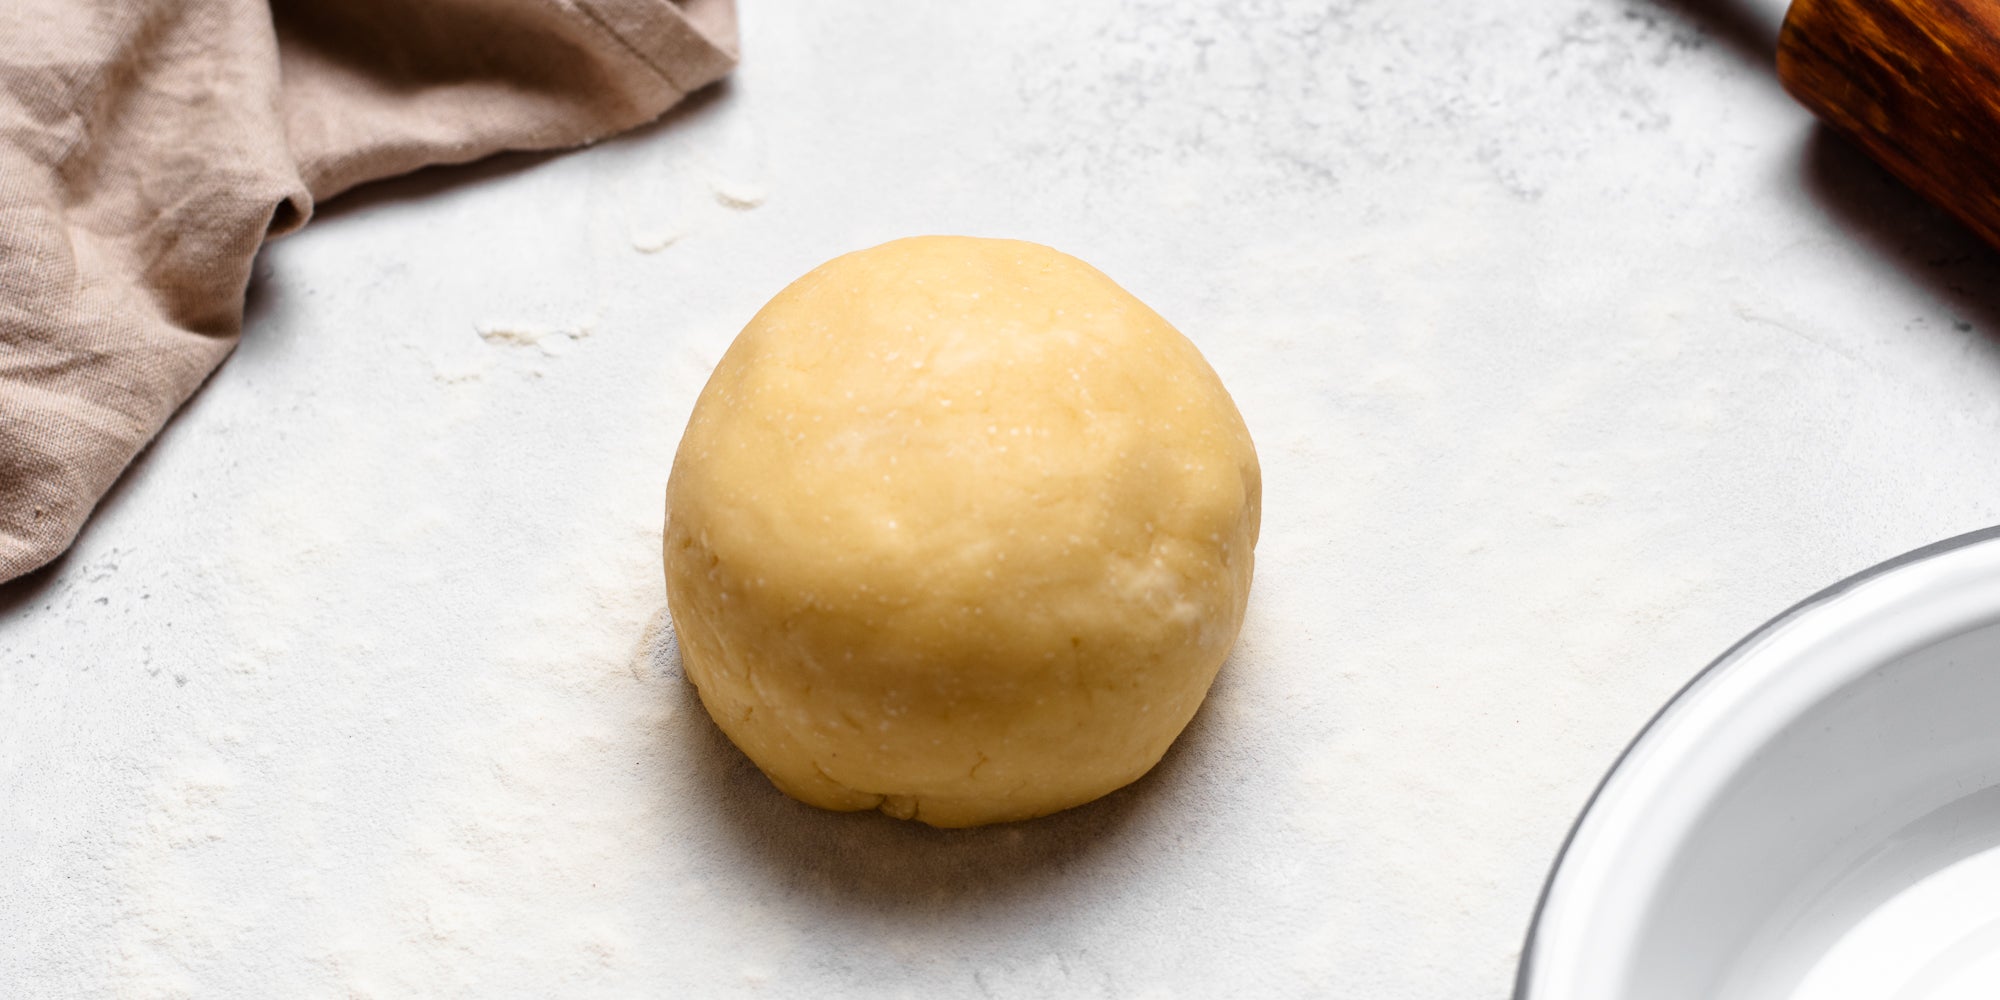 Rolled dough ball of Shortcrust Pastry ready to roll with rolling pin in background